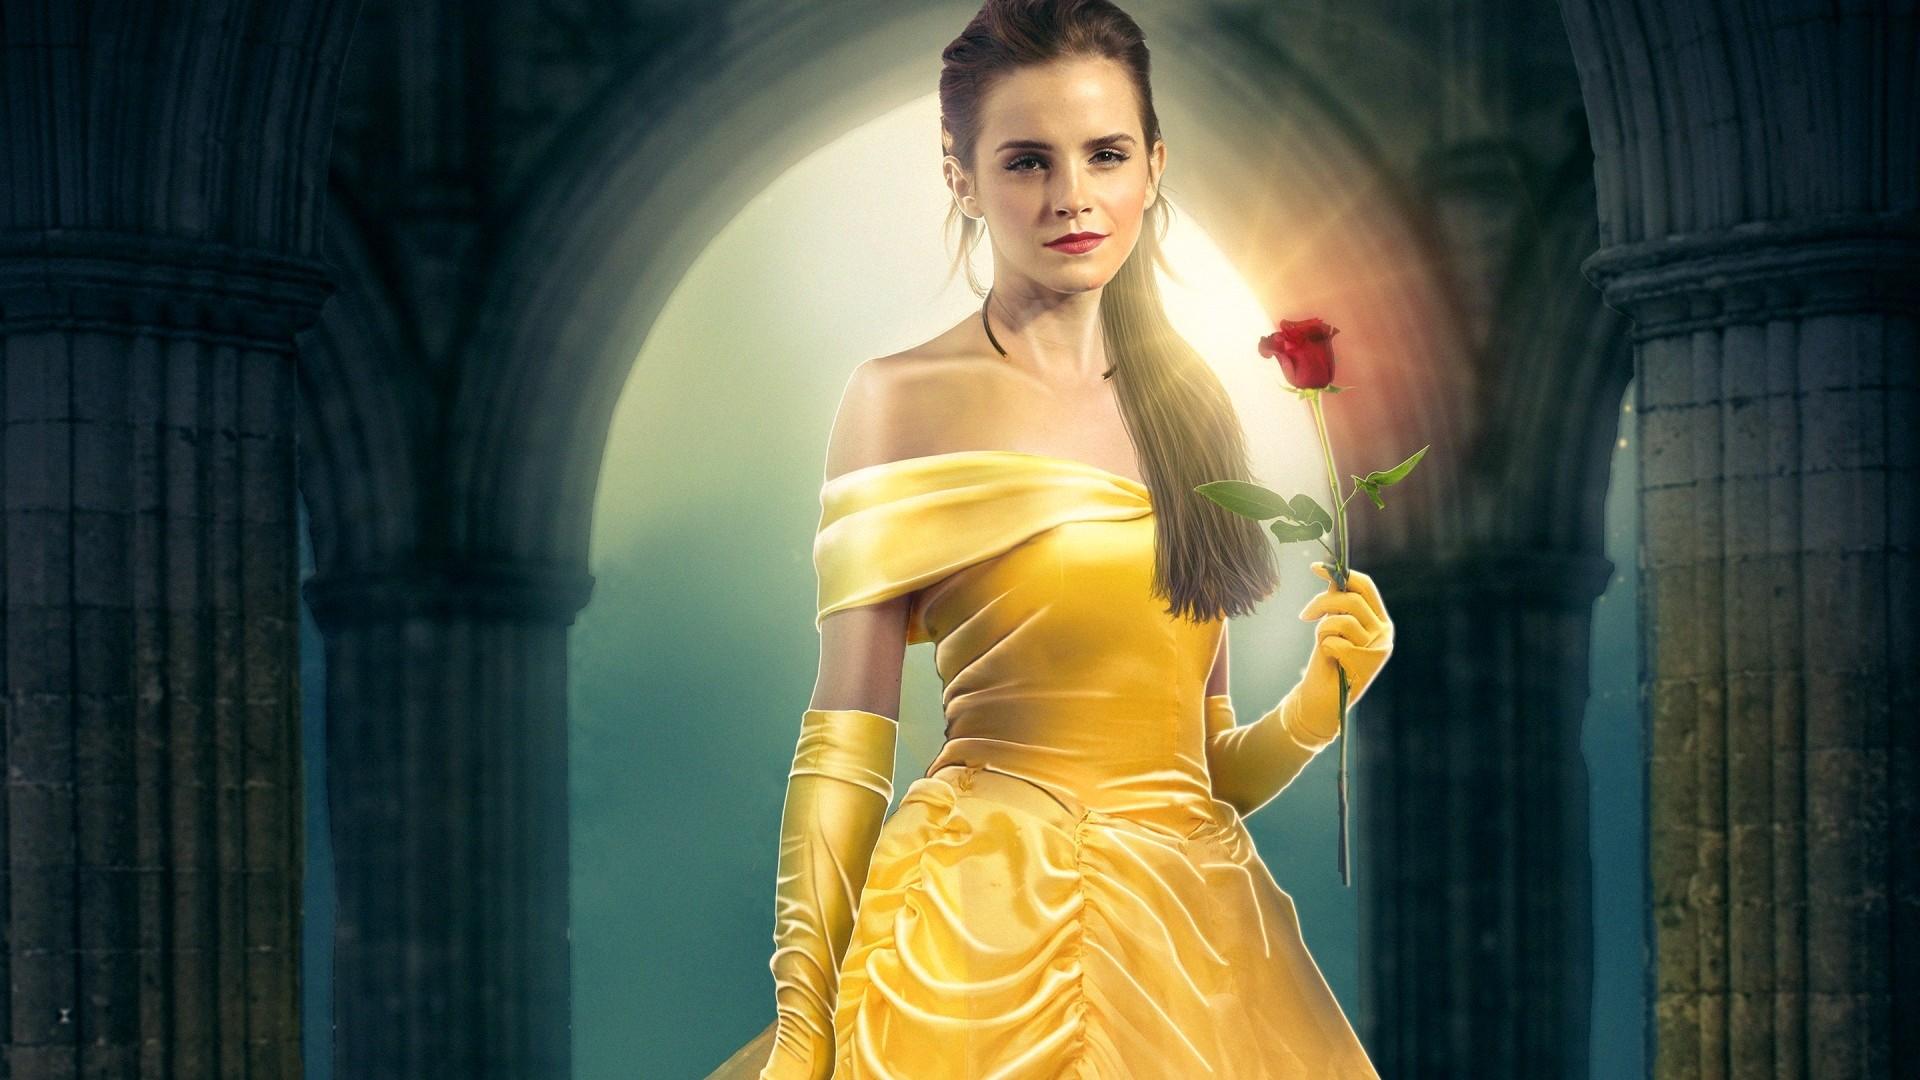 Emma Watson As Belle In Beauty And The Beast Holding Rose Wallpaper